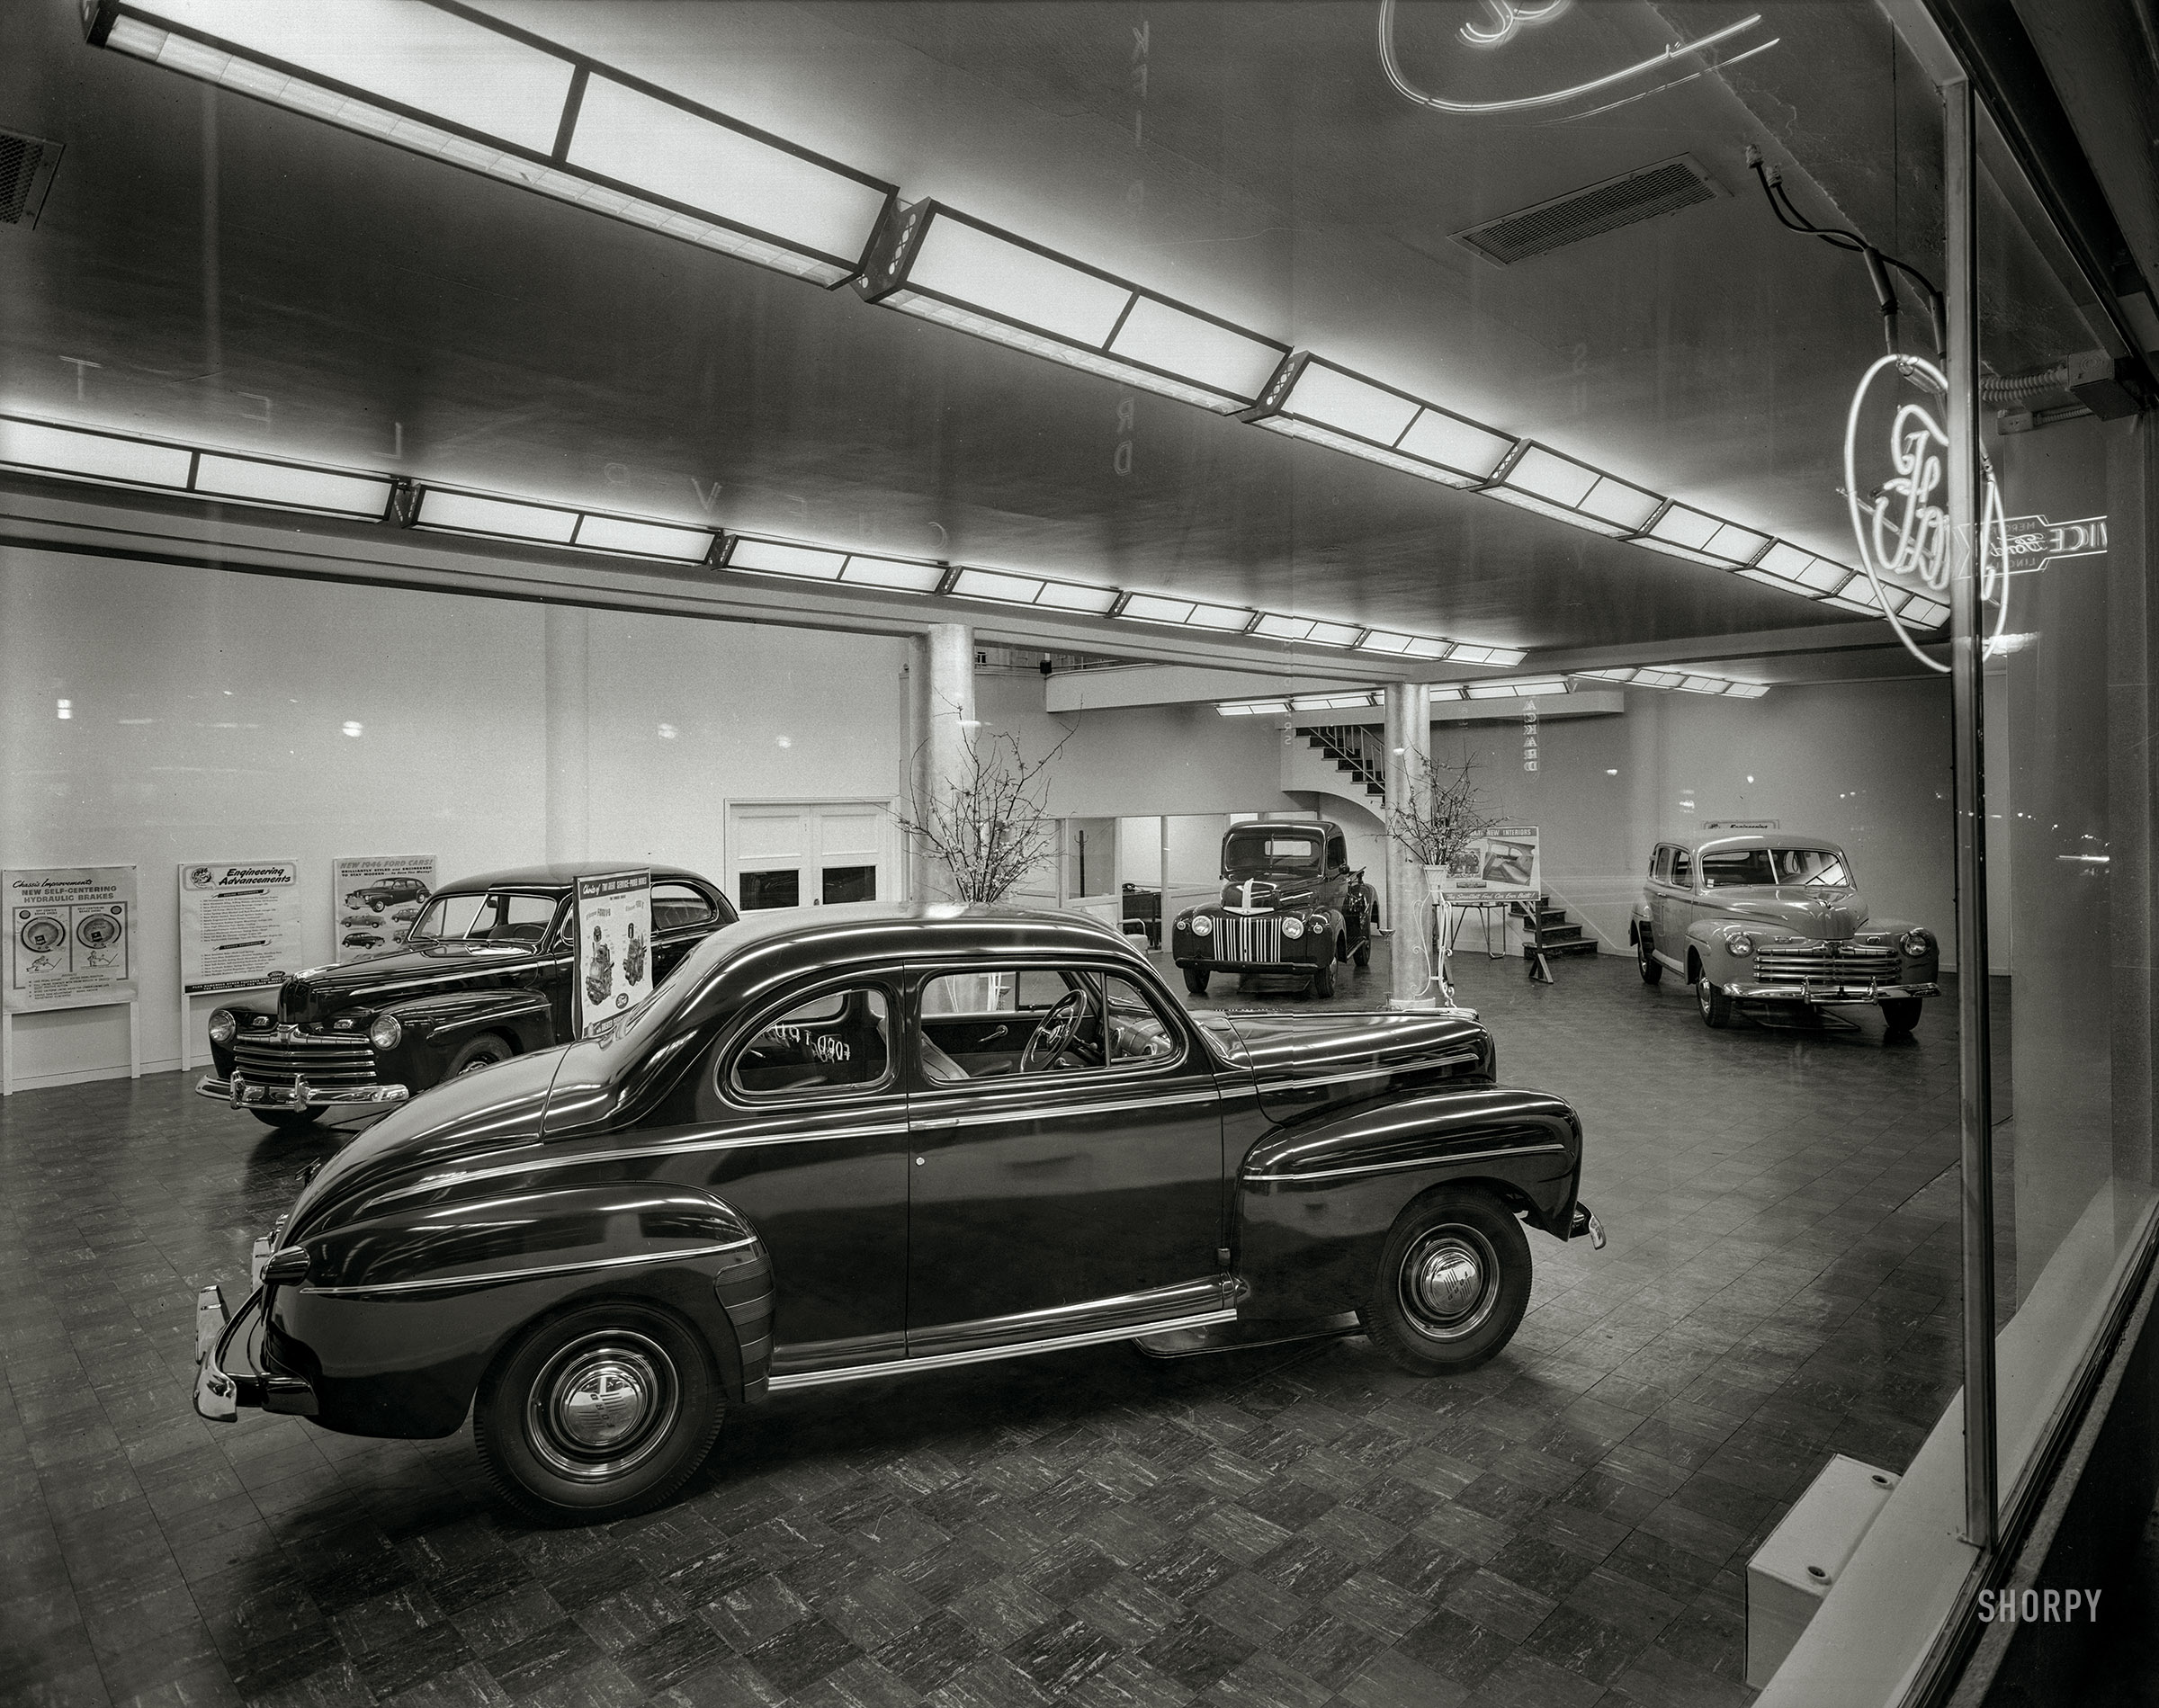 June 28, 1946. "Midtown Motors, 950 Van Ness Avenue, San Francisco." Back when Ford specialized in making cars. 8x10 inch acetate negative. View full size.